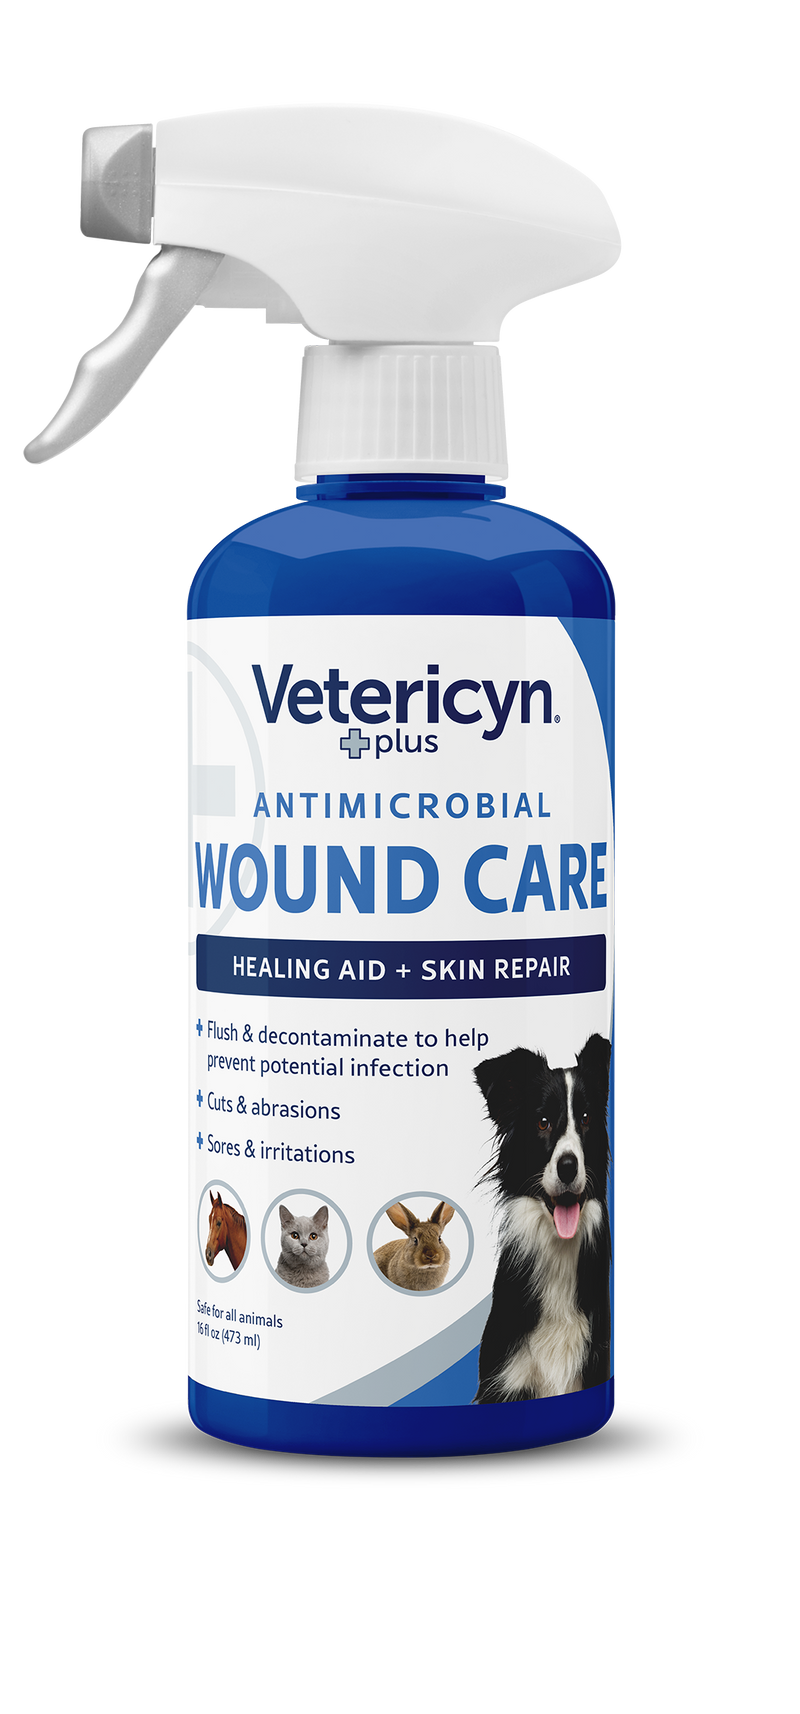 Vetericyn Plus Antimicrobial All Animal Wound Care Spray, 16-ounce